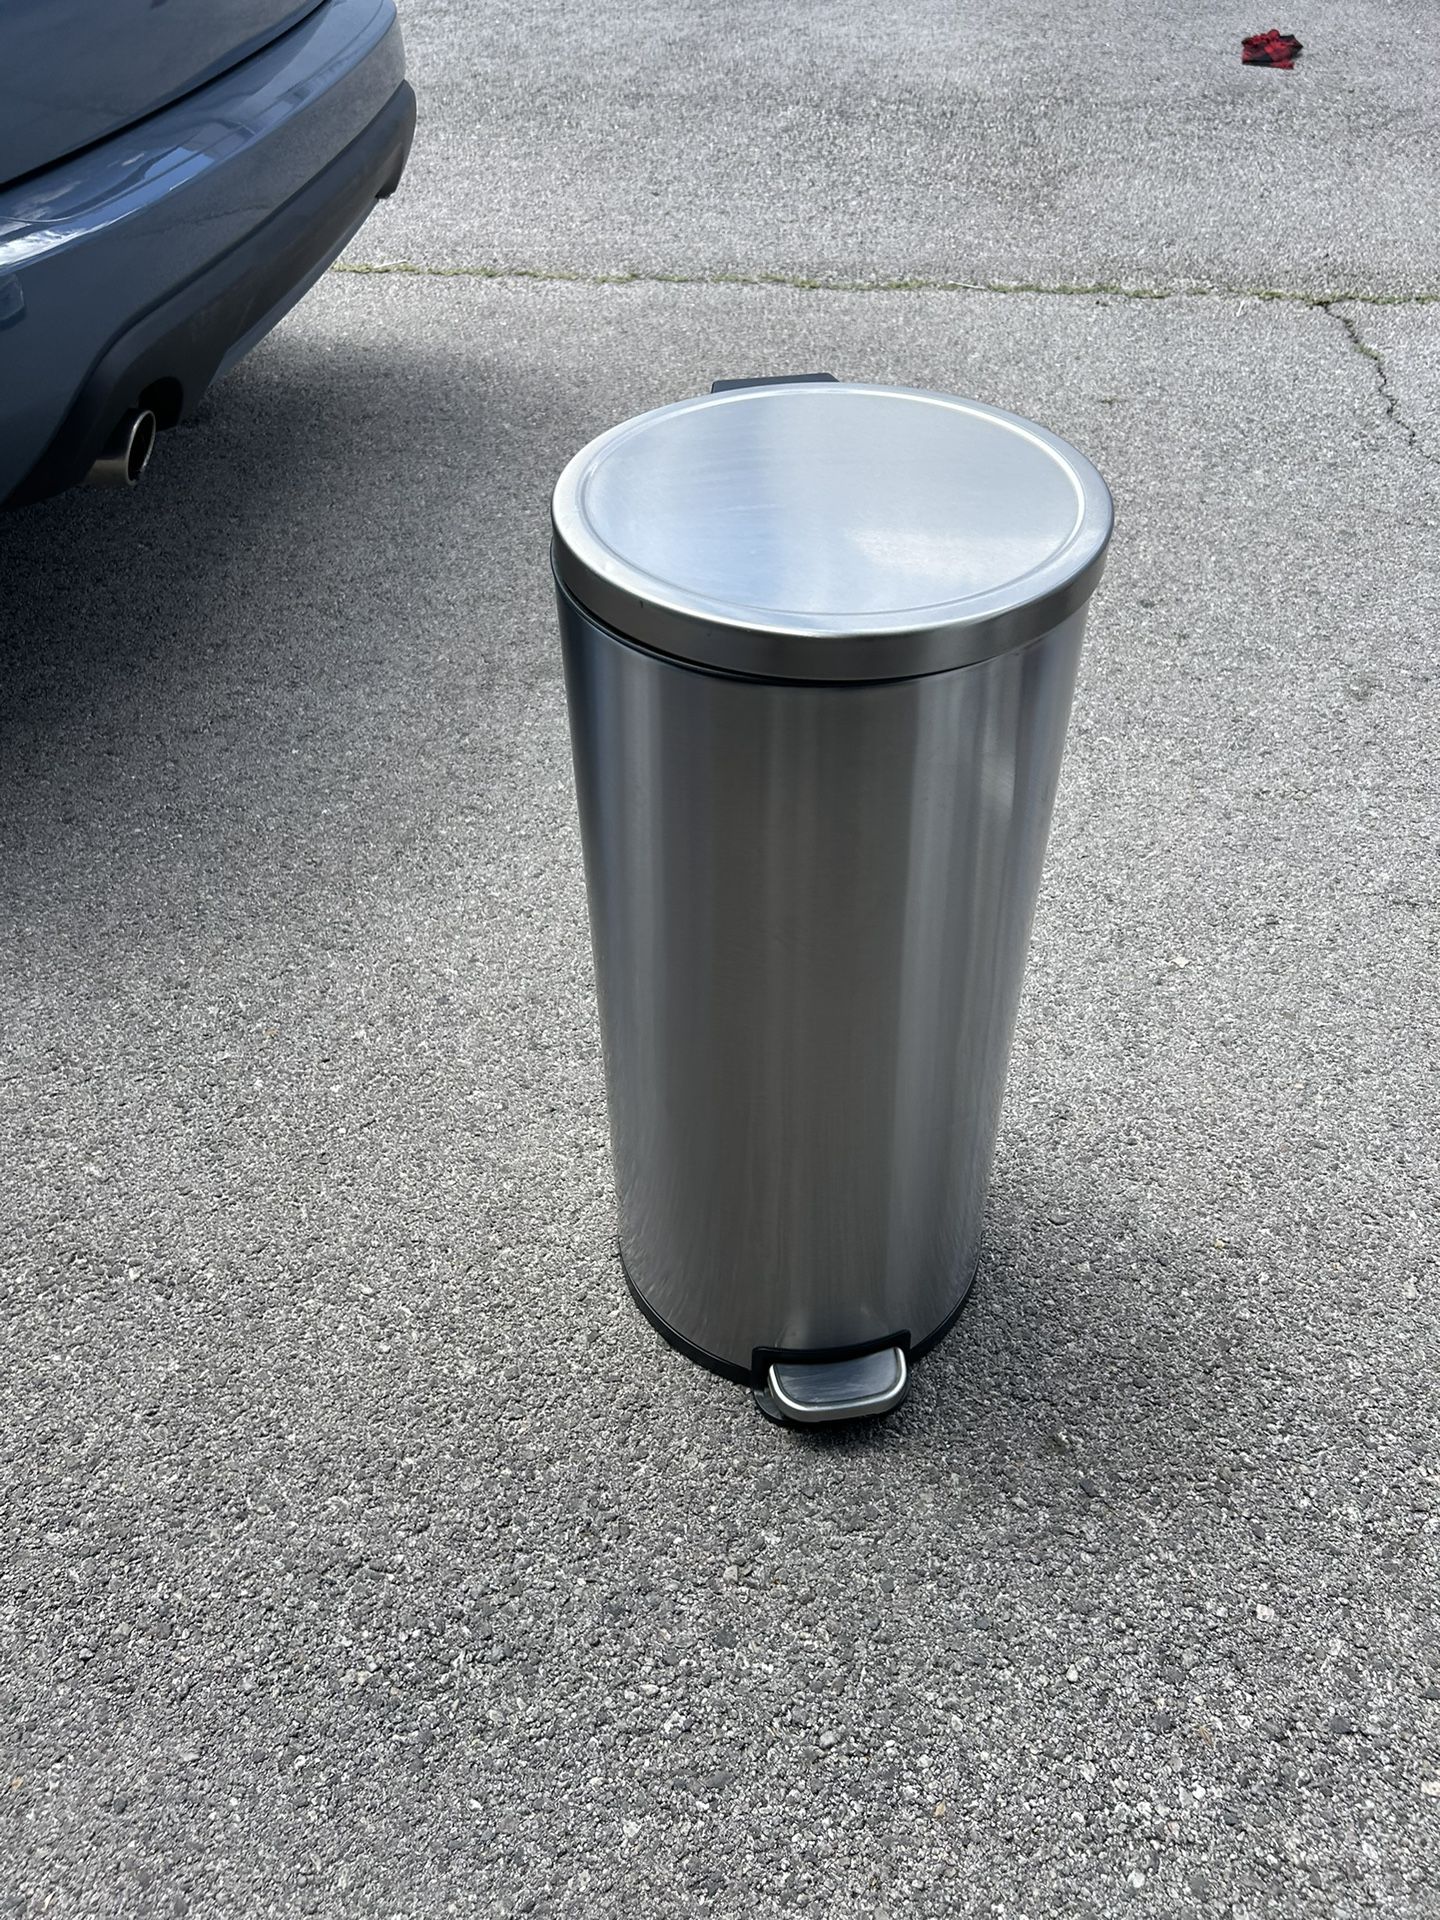 13 Gallon Stainless Steal Trash Can. Never Used, Sat In Storage For A Couple Months. 